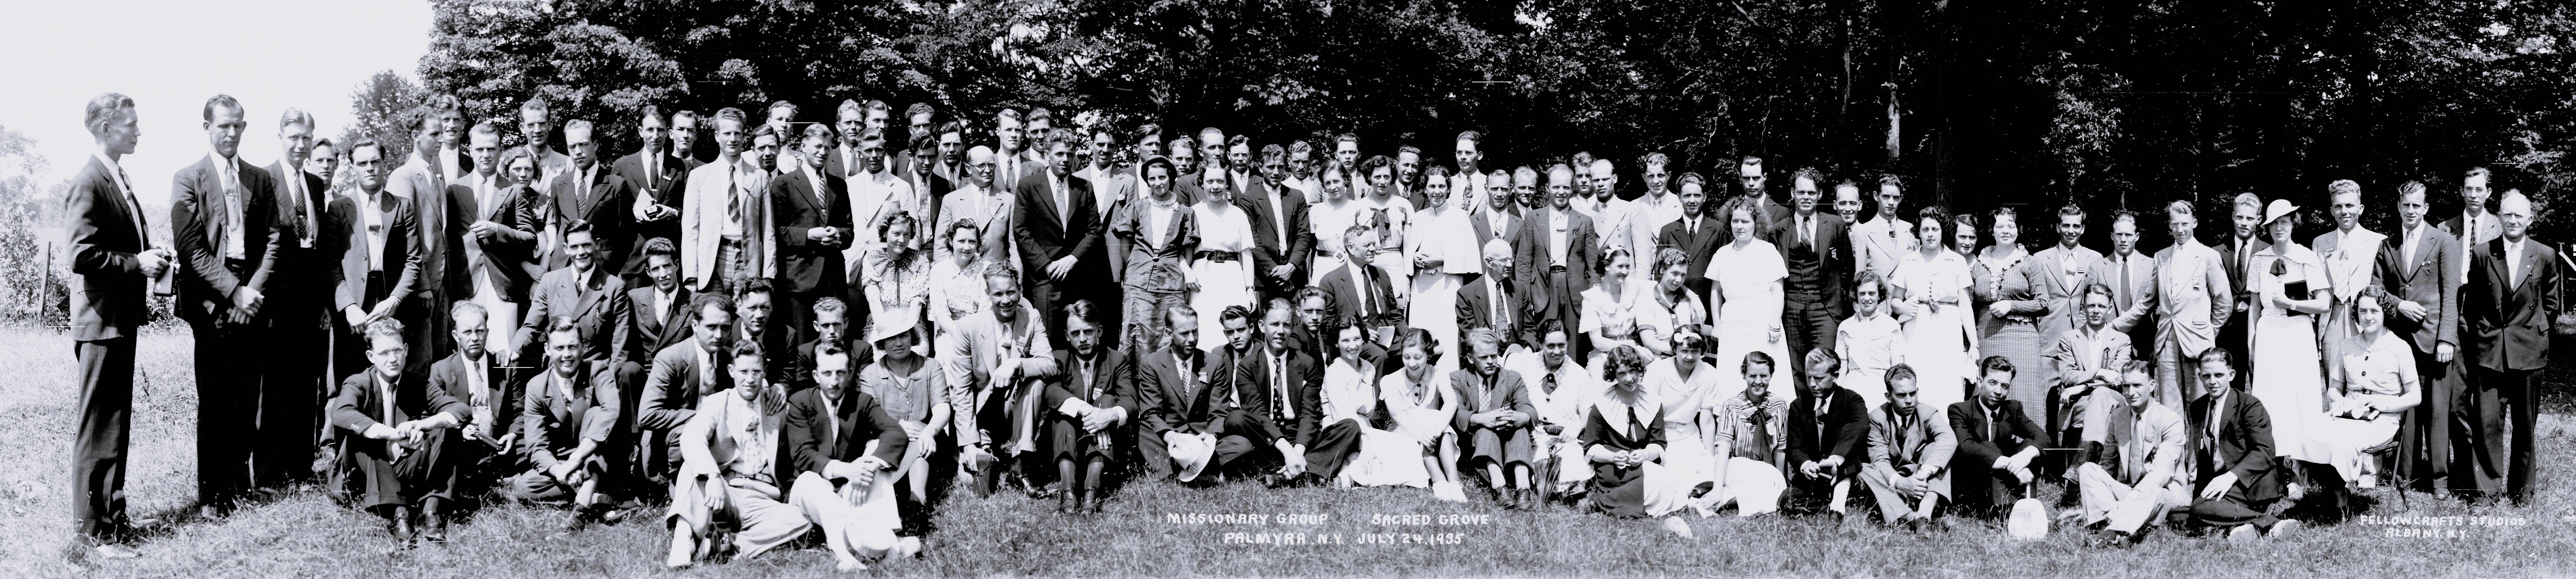 Sacred Grove - Eastern States Missionaries,  1935 July 24